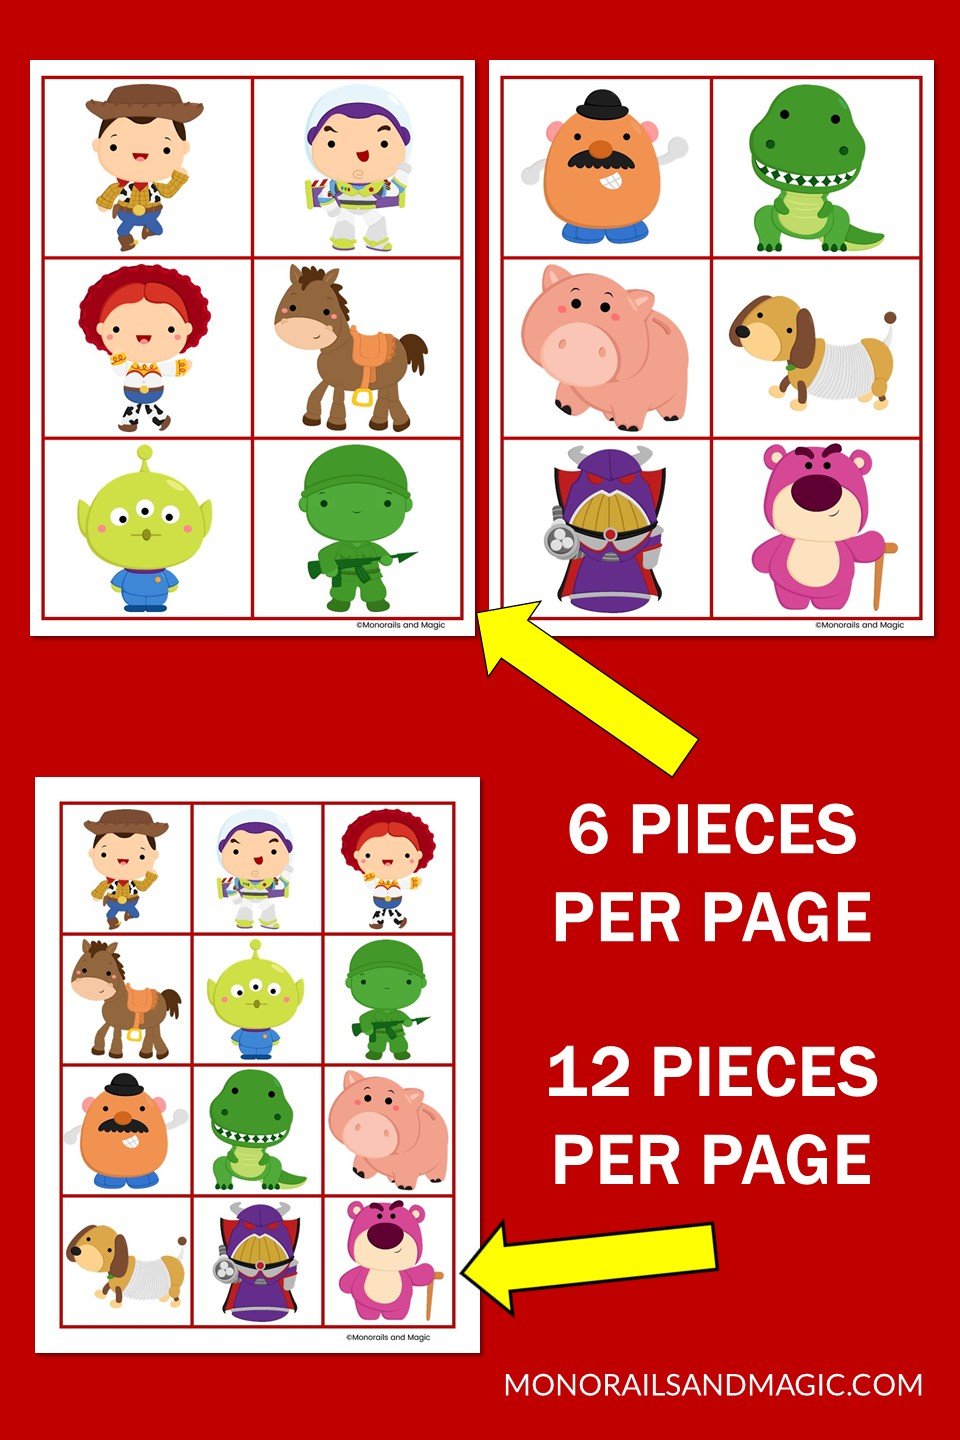 Free printable Toy Story memory game for kids.